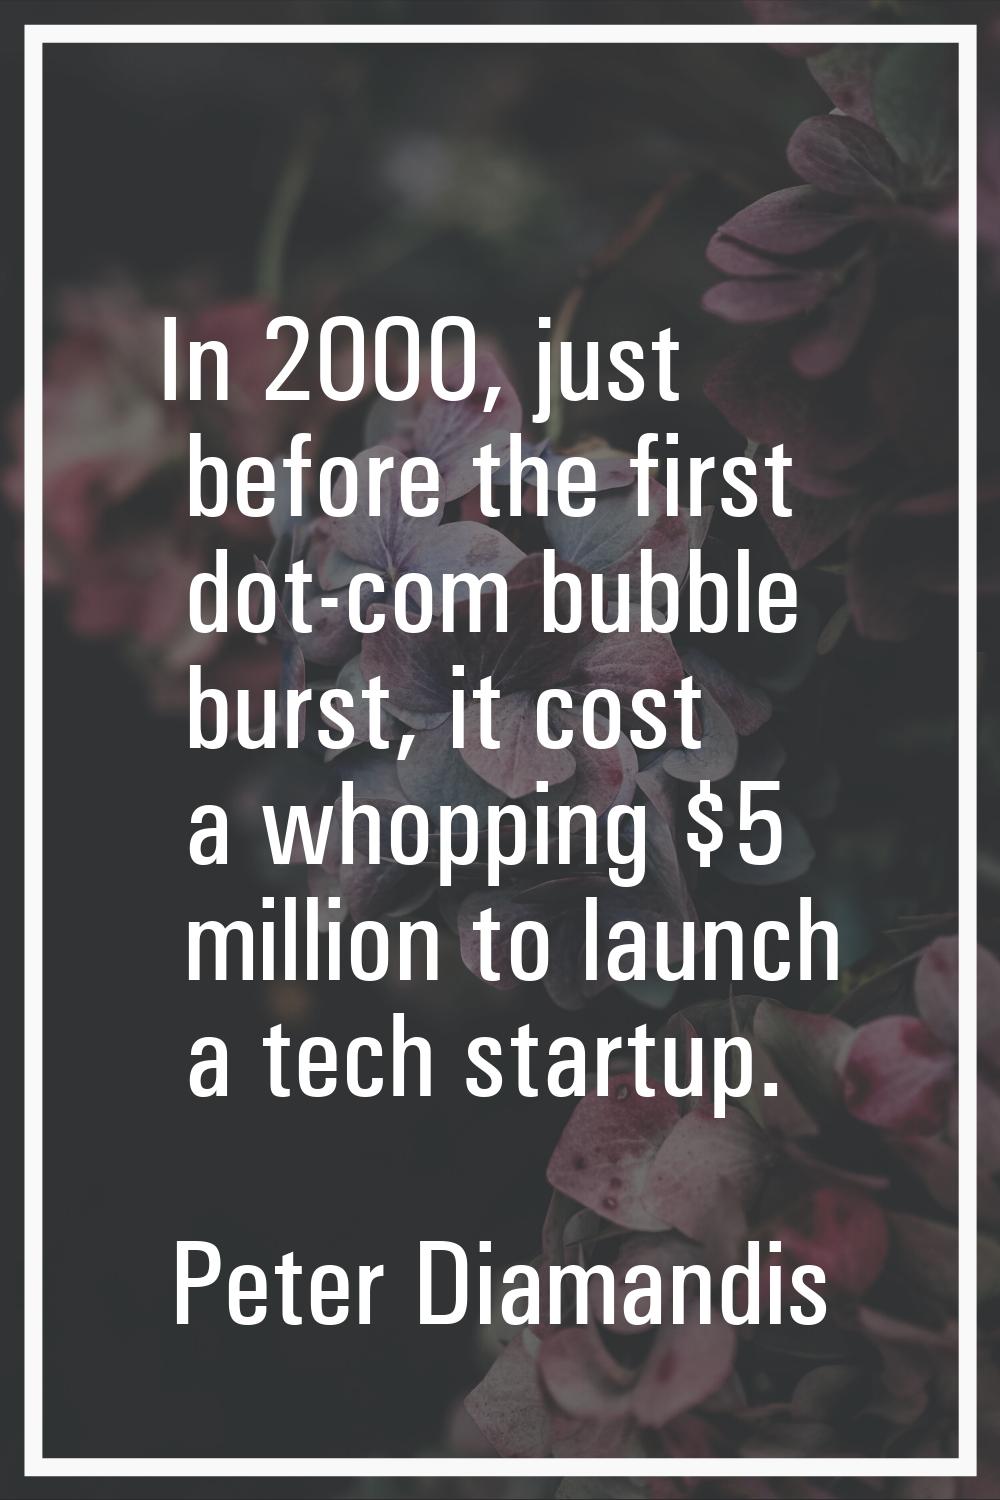 In 2000, just before the first dot-com bubble burst, it cost a whopping $5 million to launch a tech